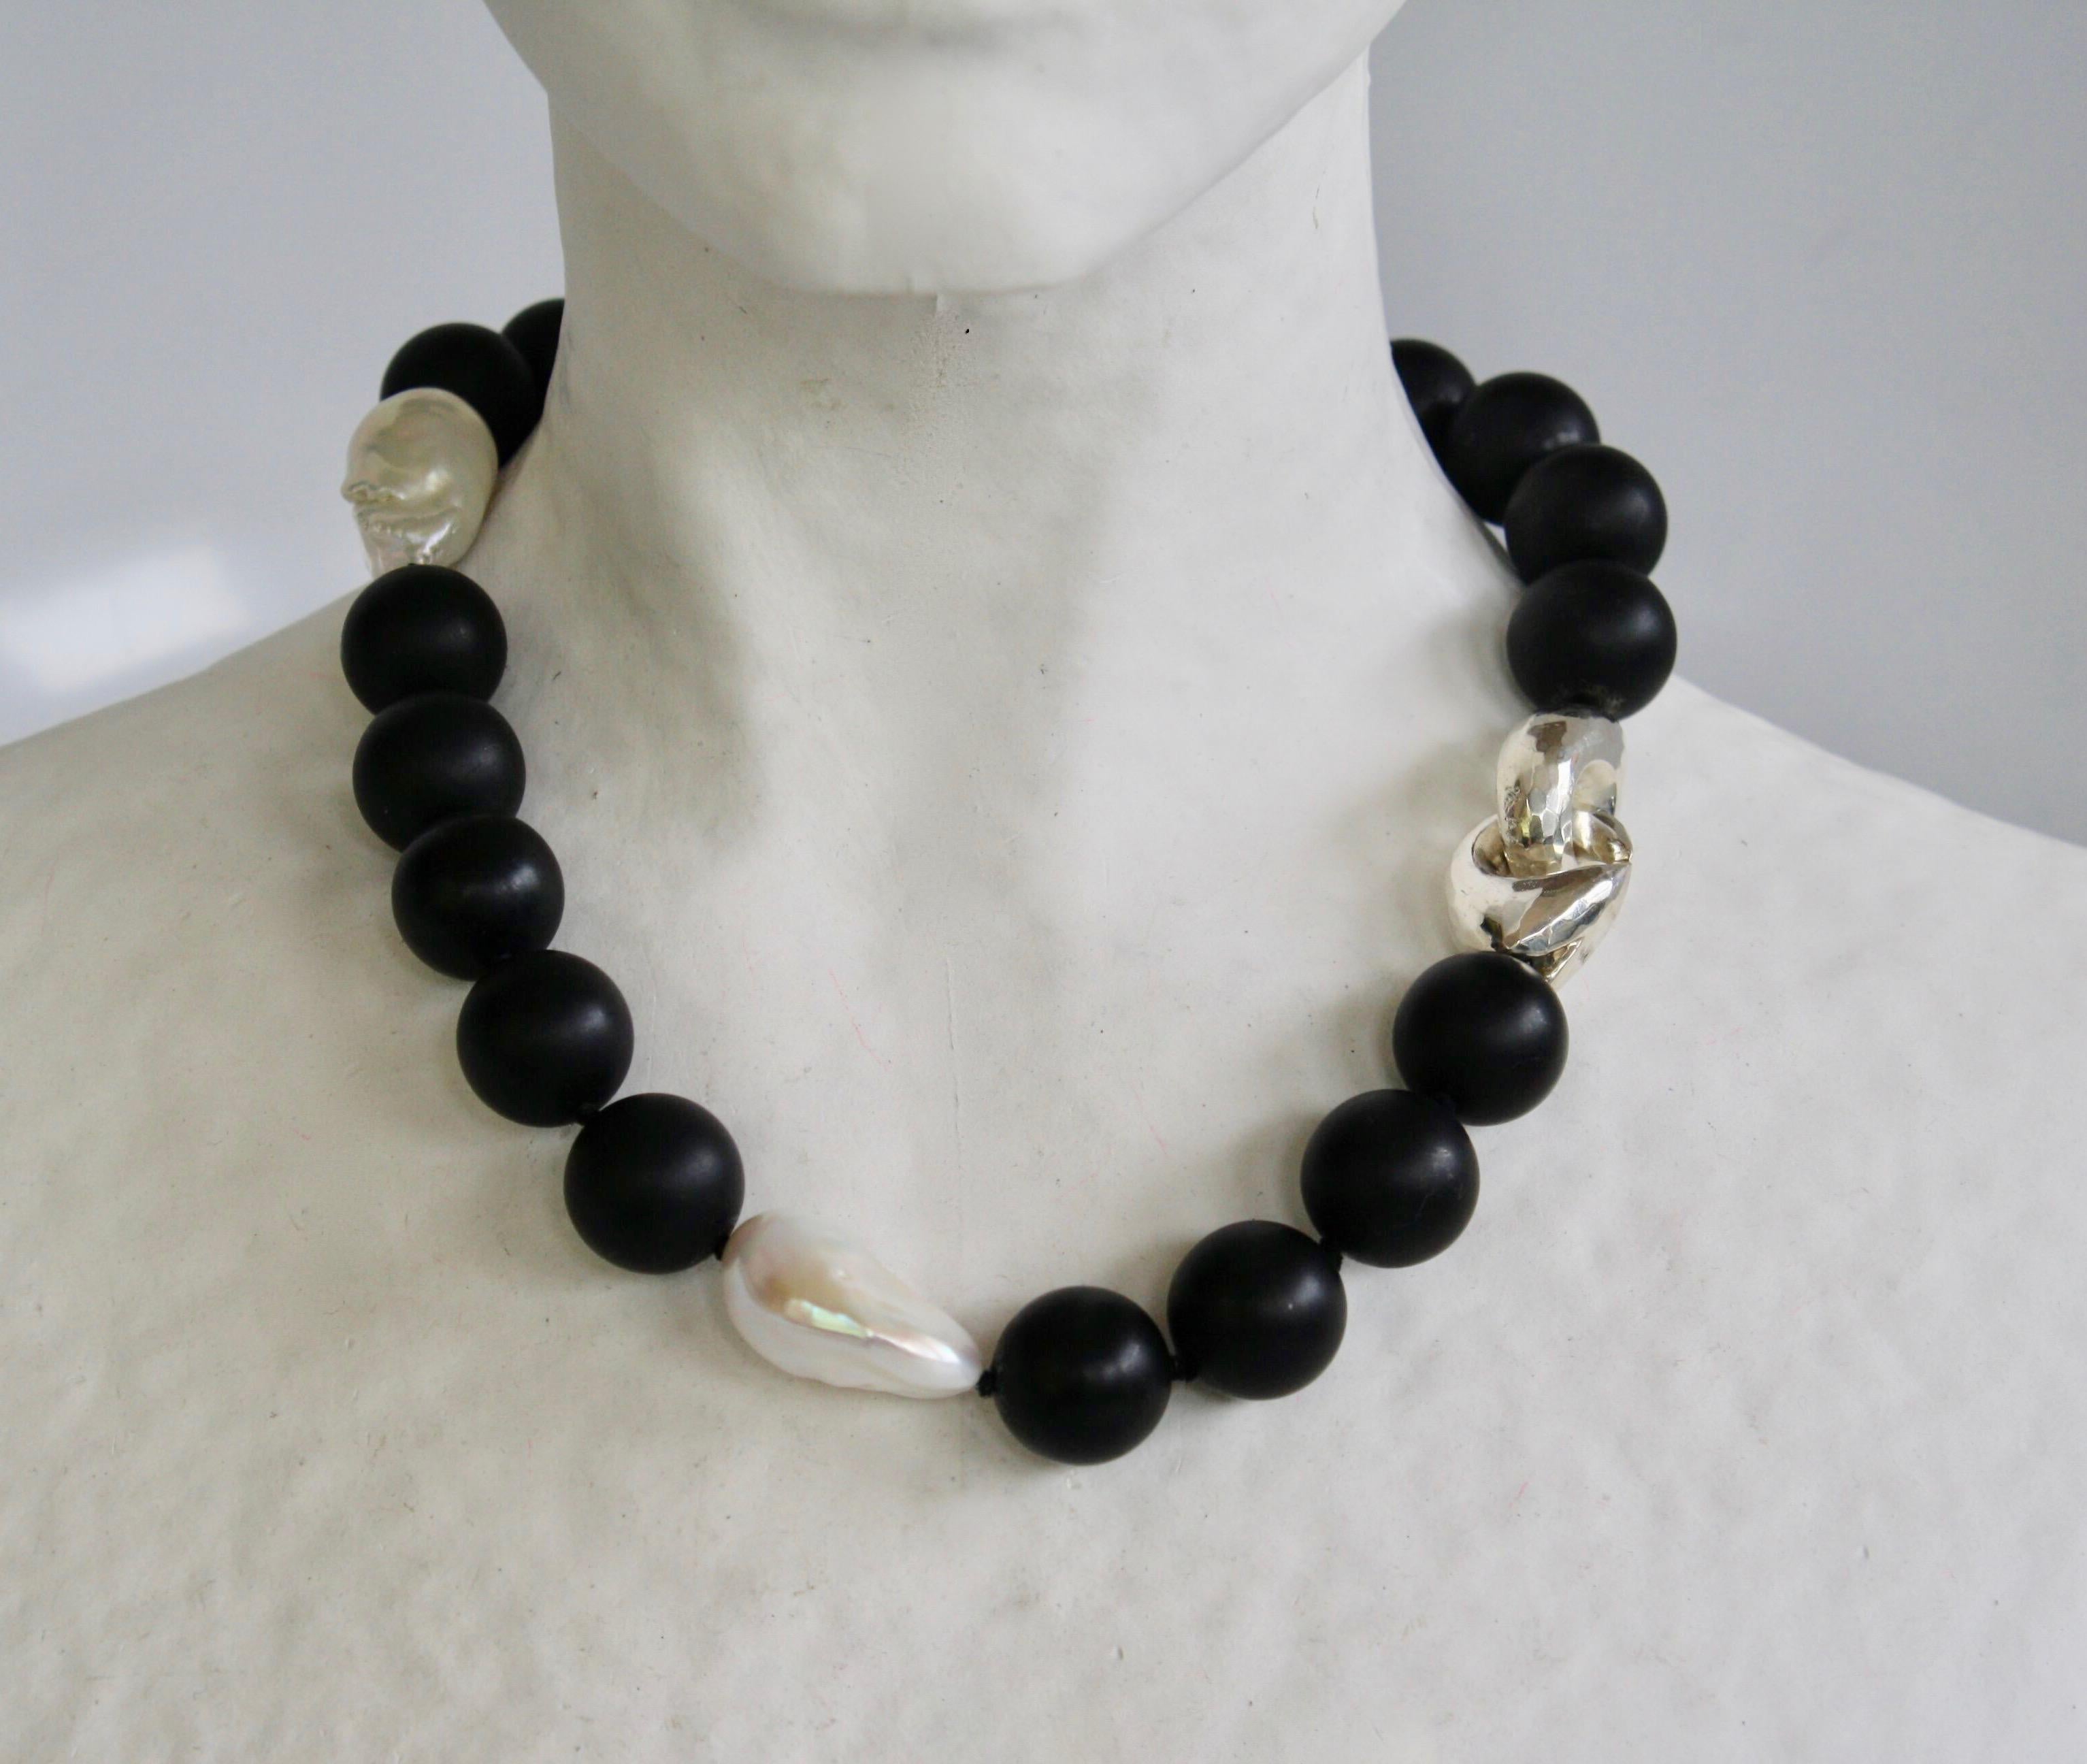 Black onyx and baroque pearl choker necklace with solid sterling silver clasp from Patricia von Musulin. 